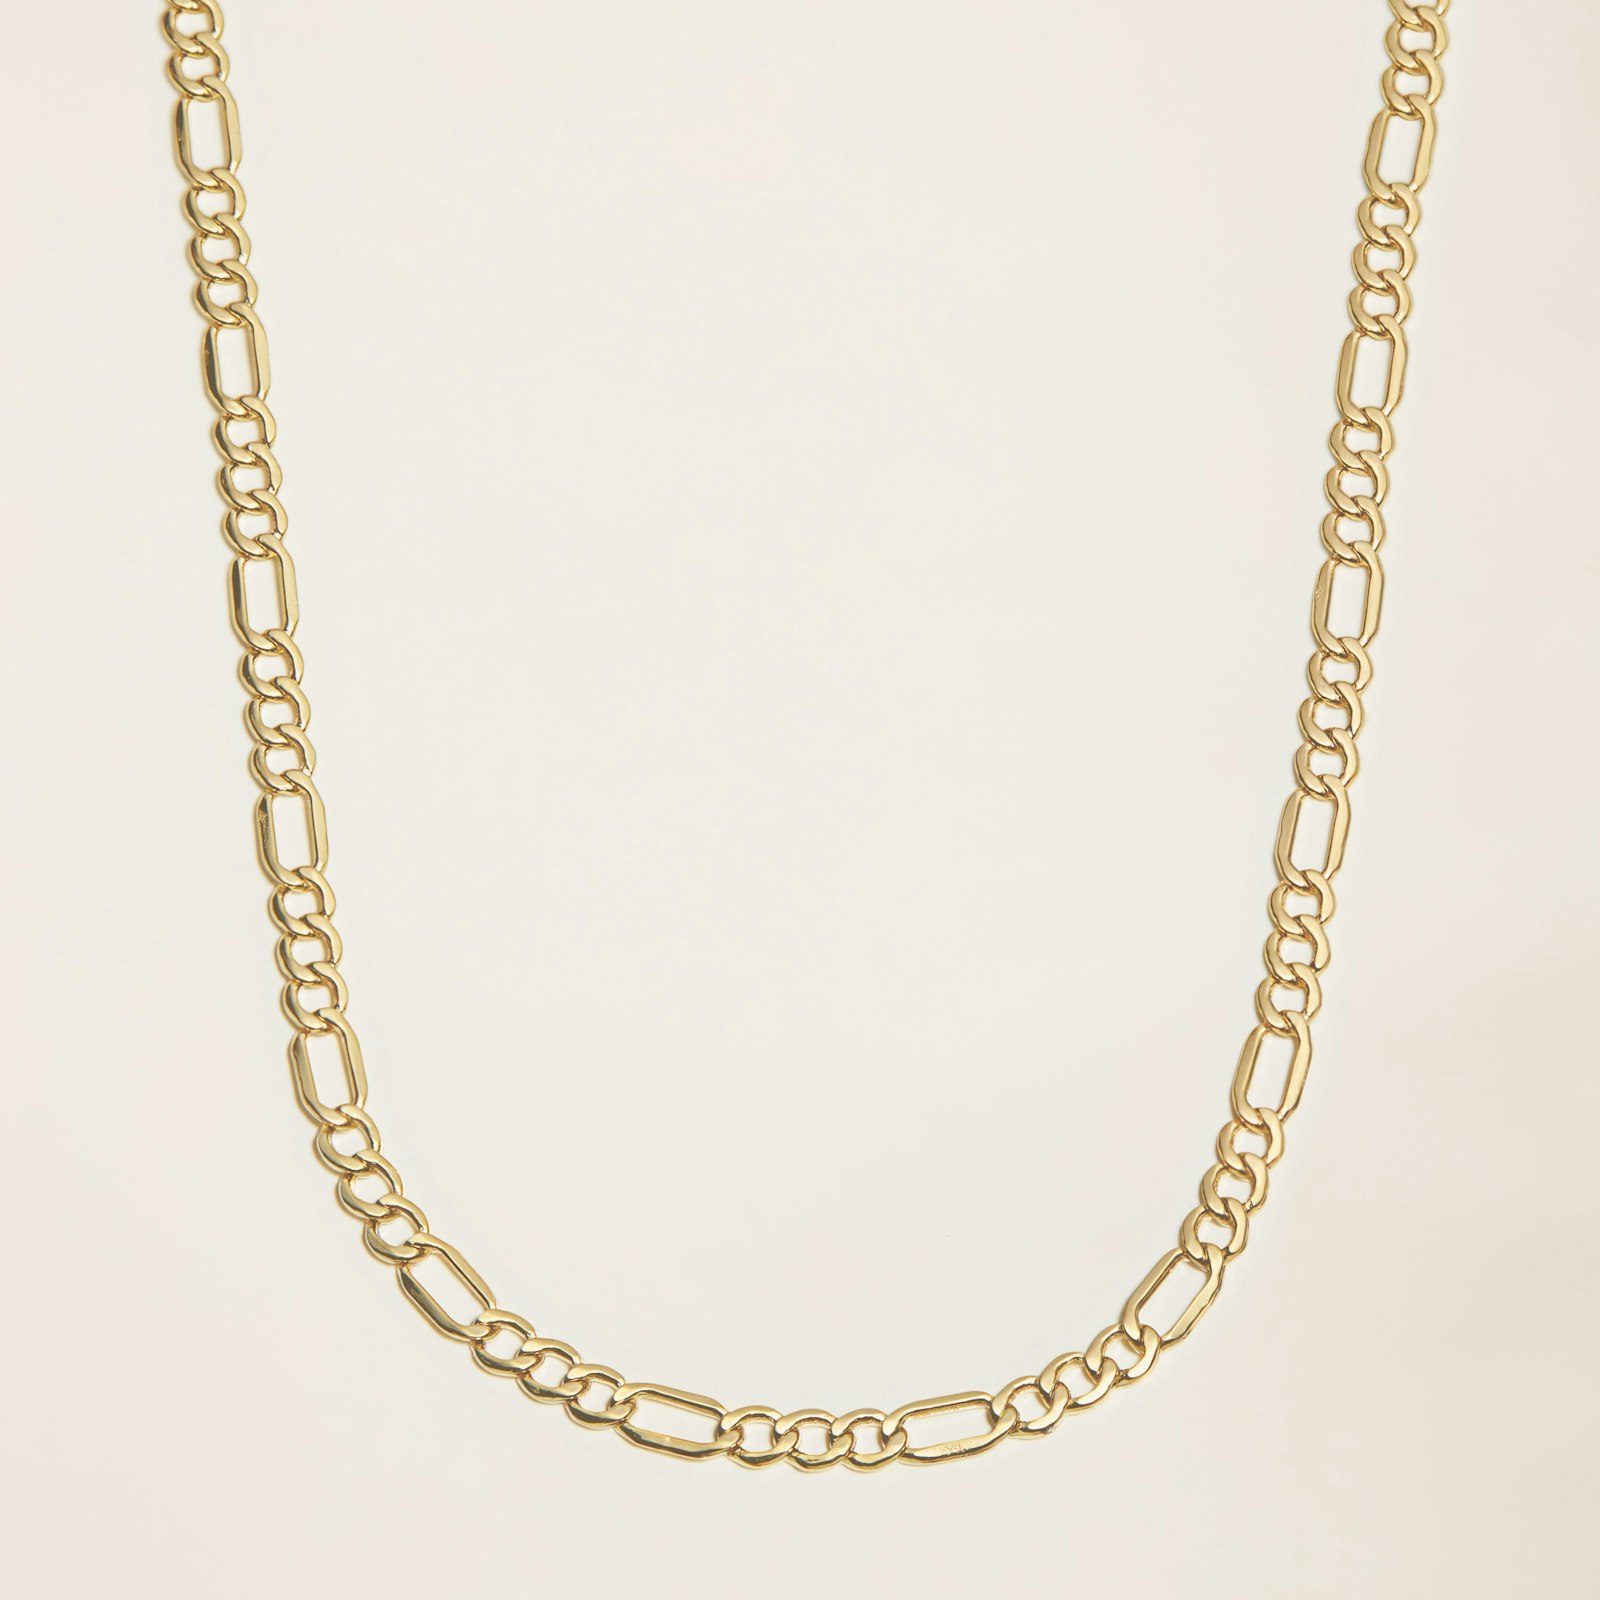 14K Gold Figaro Chain Necklace - 16__A_6337_Edited.jpg